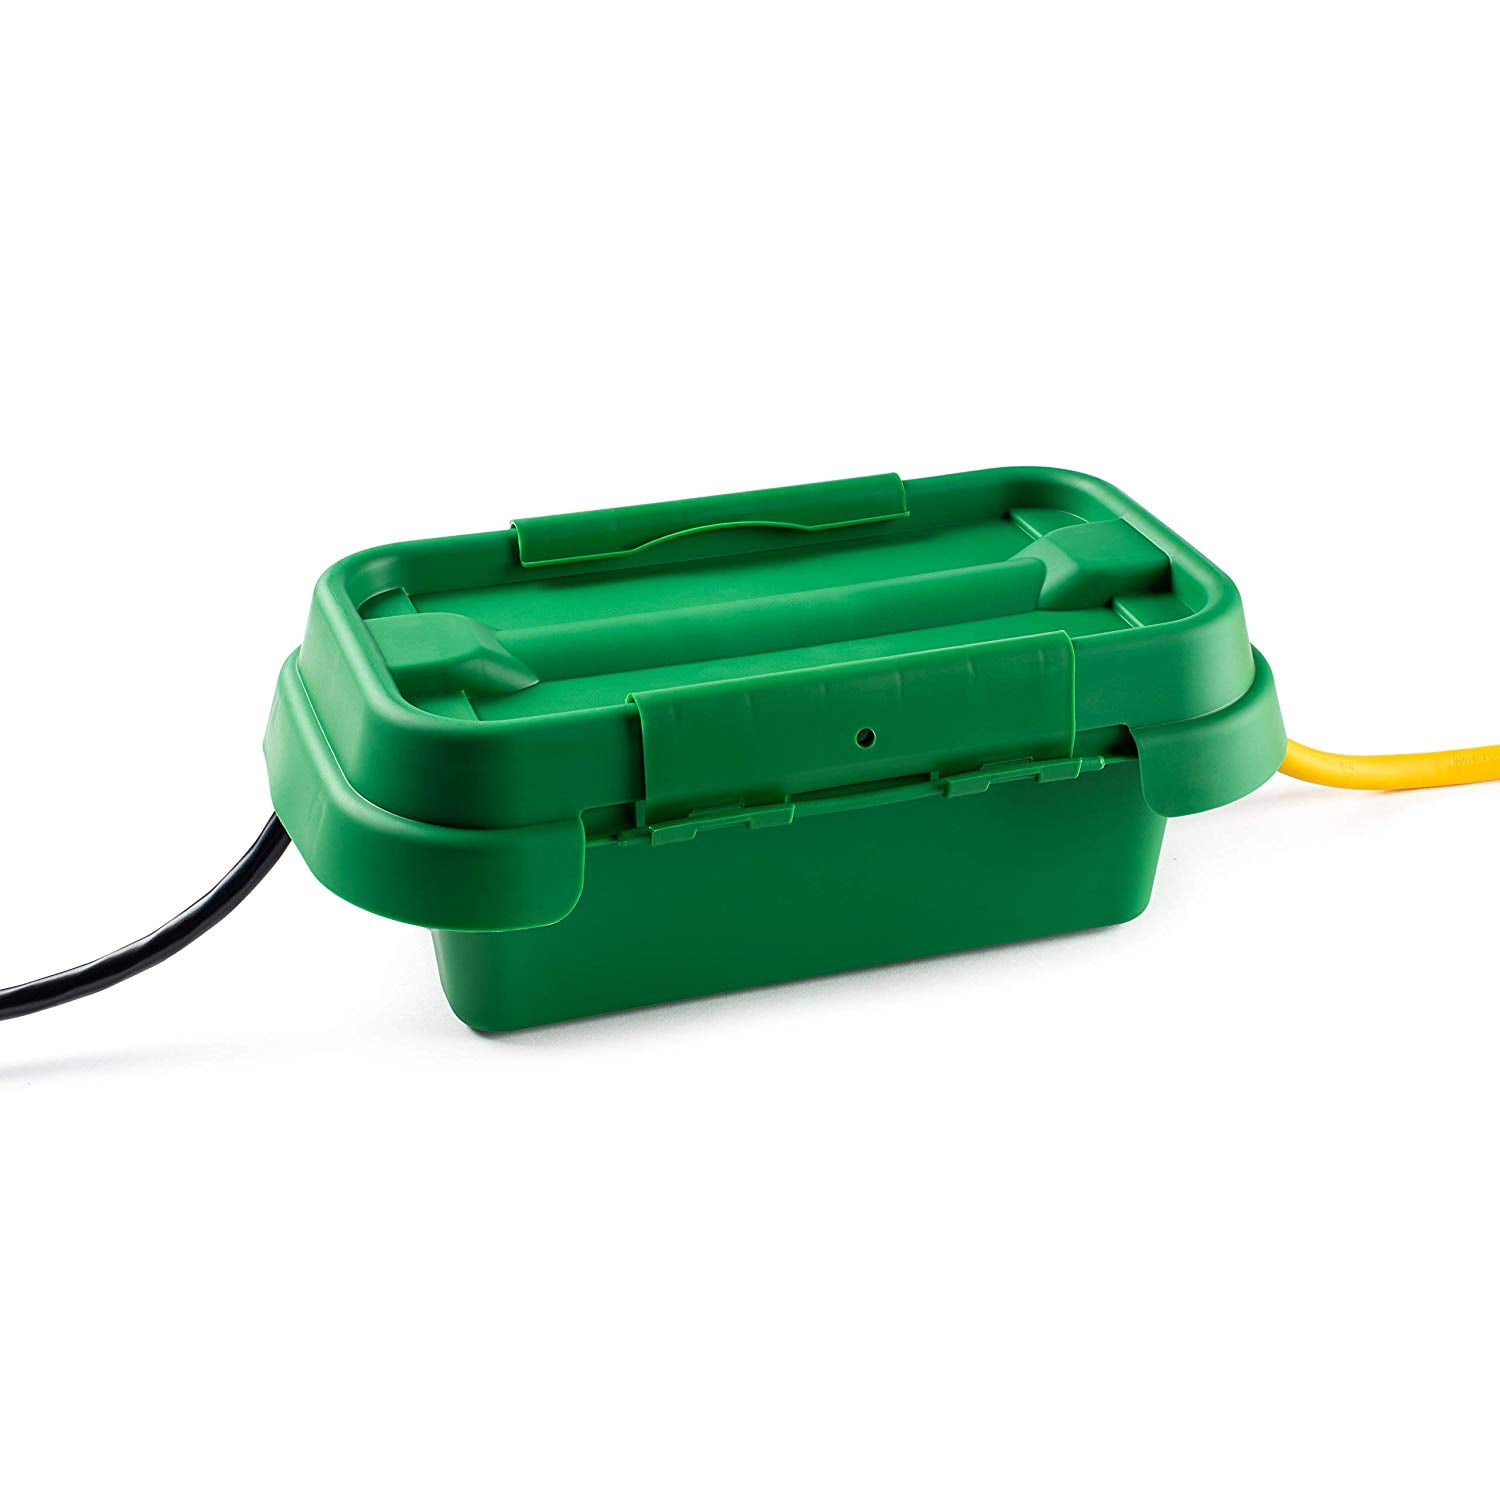 Sockit Box The Original Weatherproof Connection Box Indoor & Outdoor  Electrical Cord Enclosure for Timers, Extension Cables, Holiday Lights,  Tools